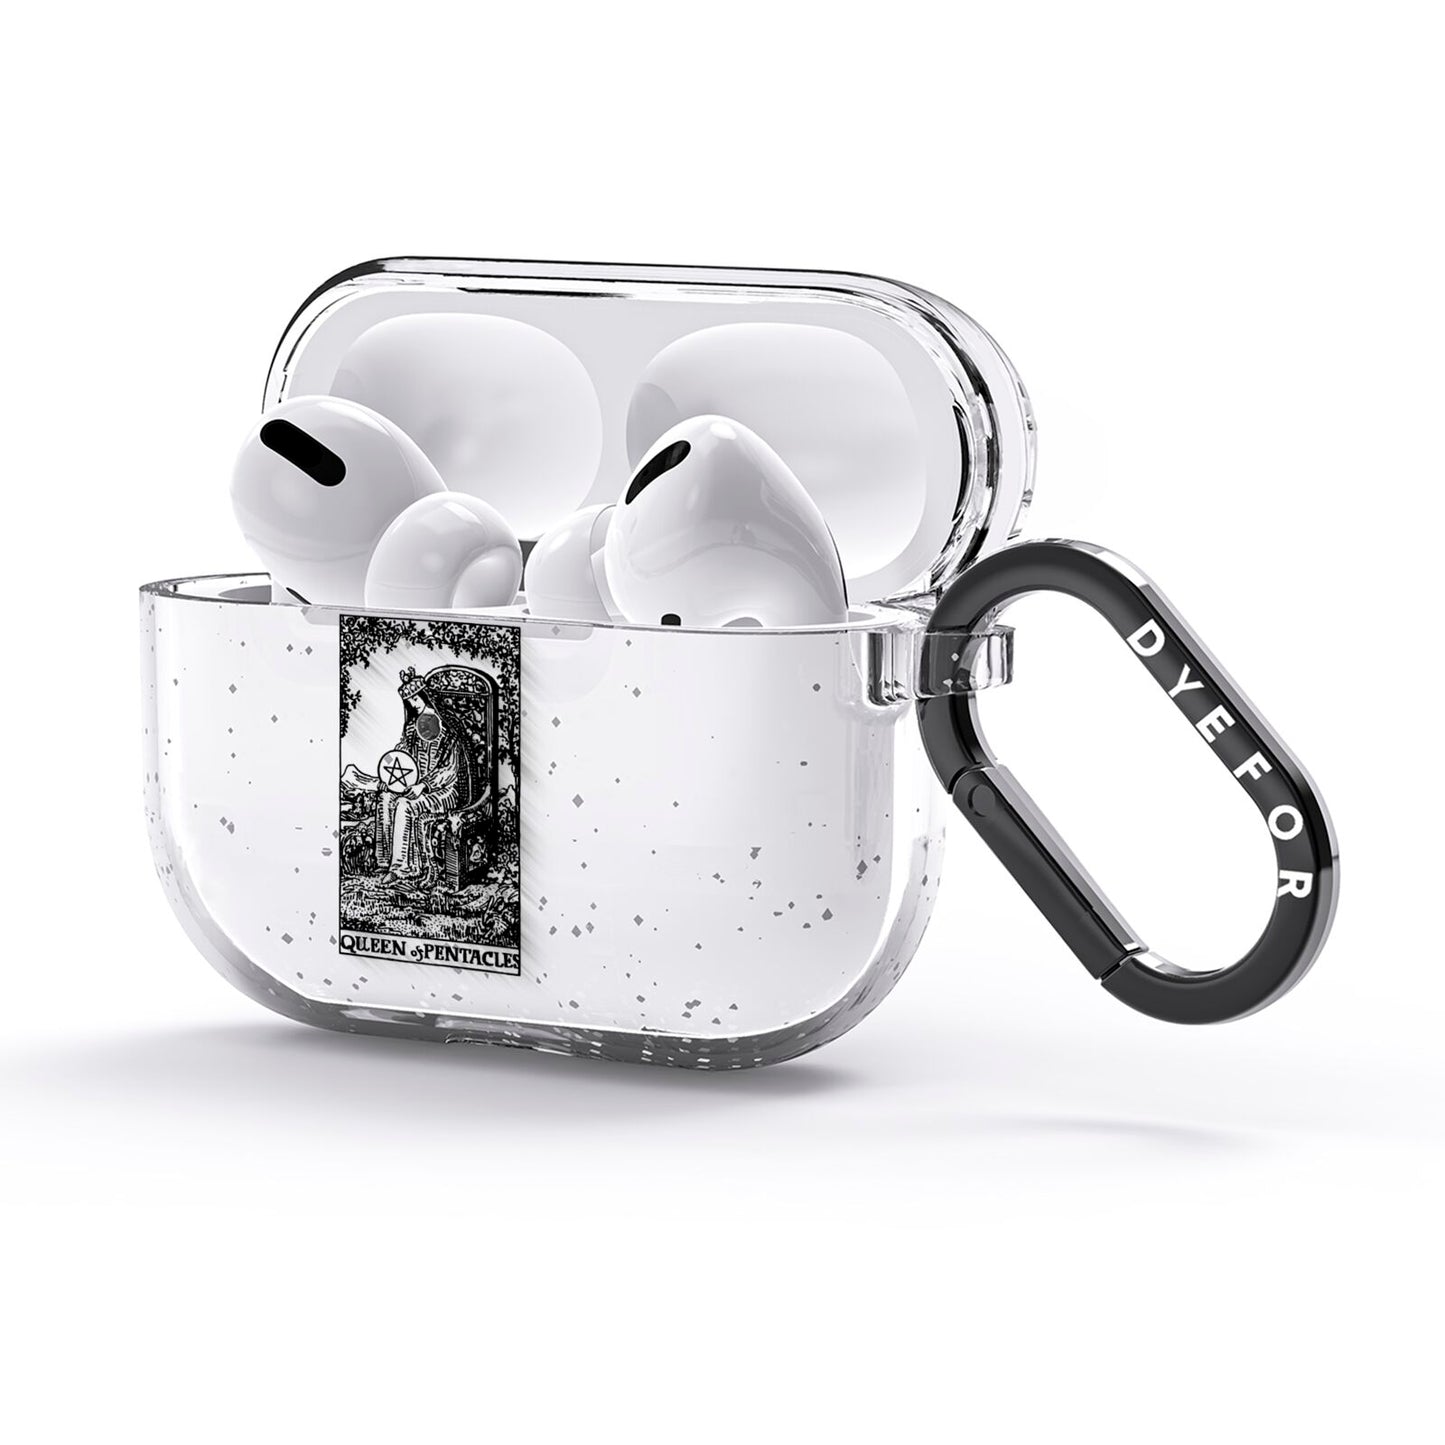 Queen of Pentacles Monochrome AirPods Glitter Case 3rd Gen Side Image